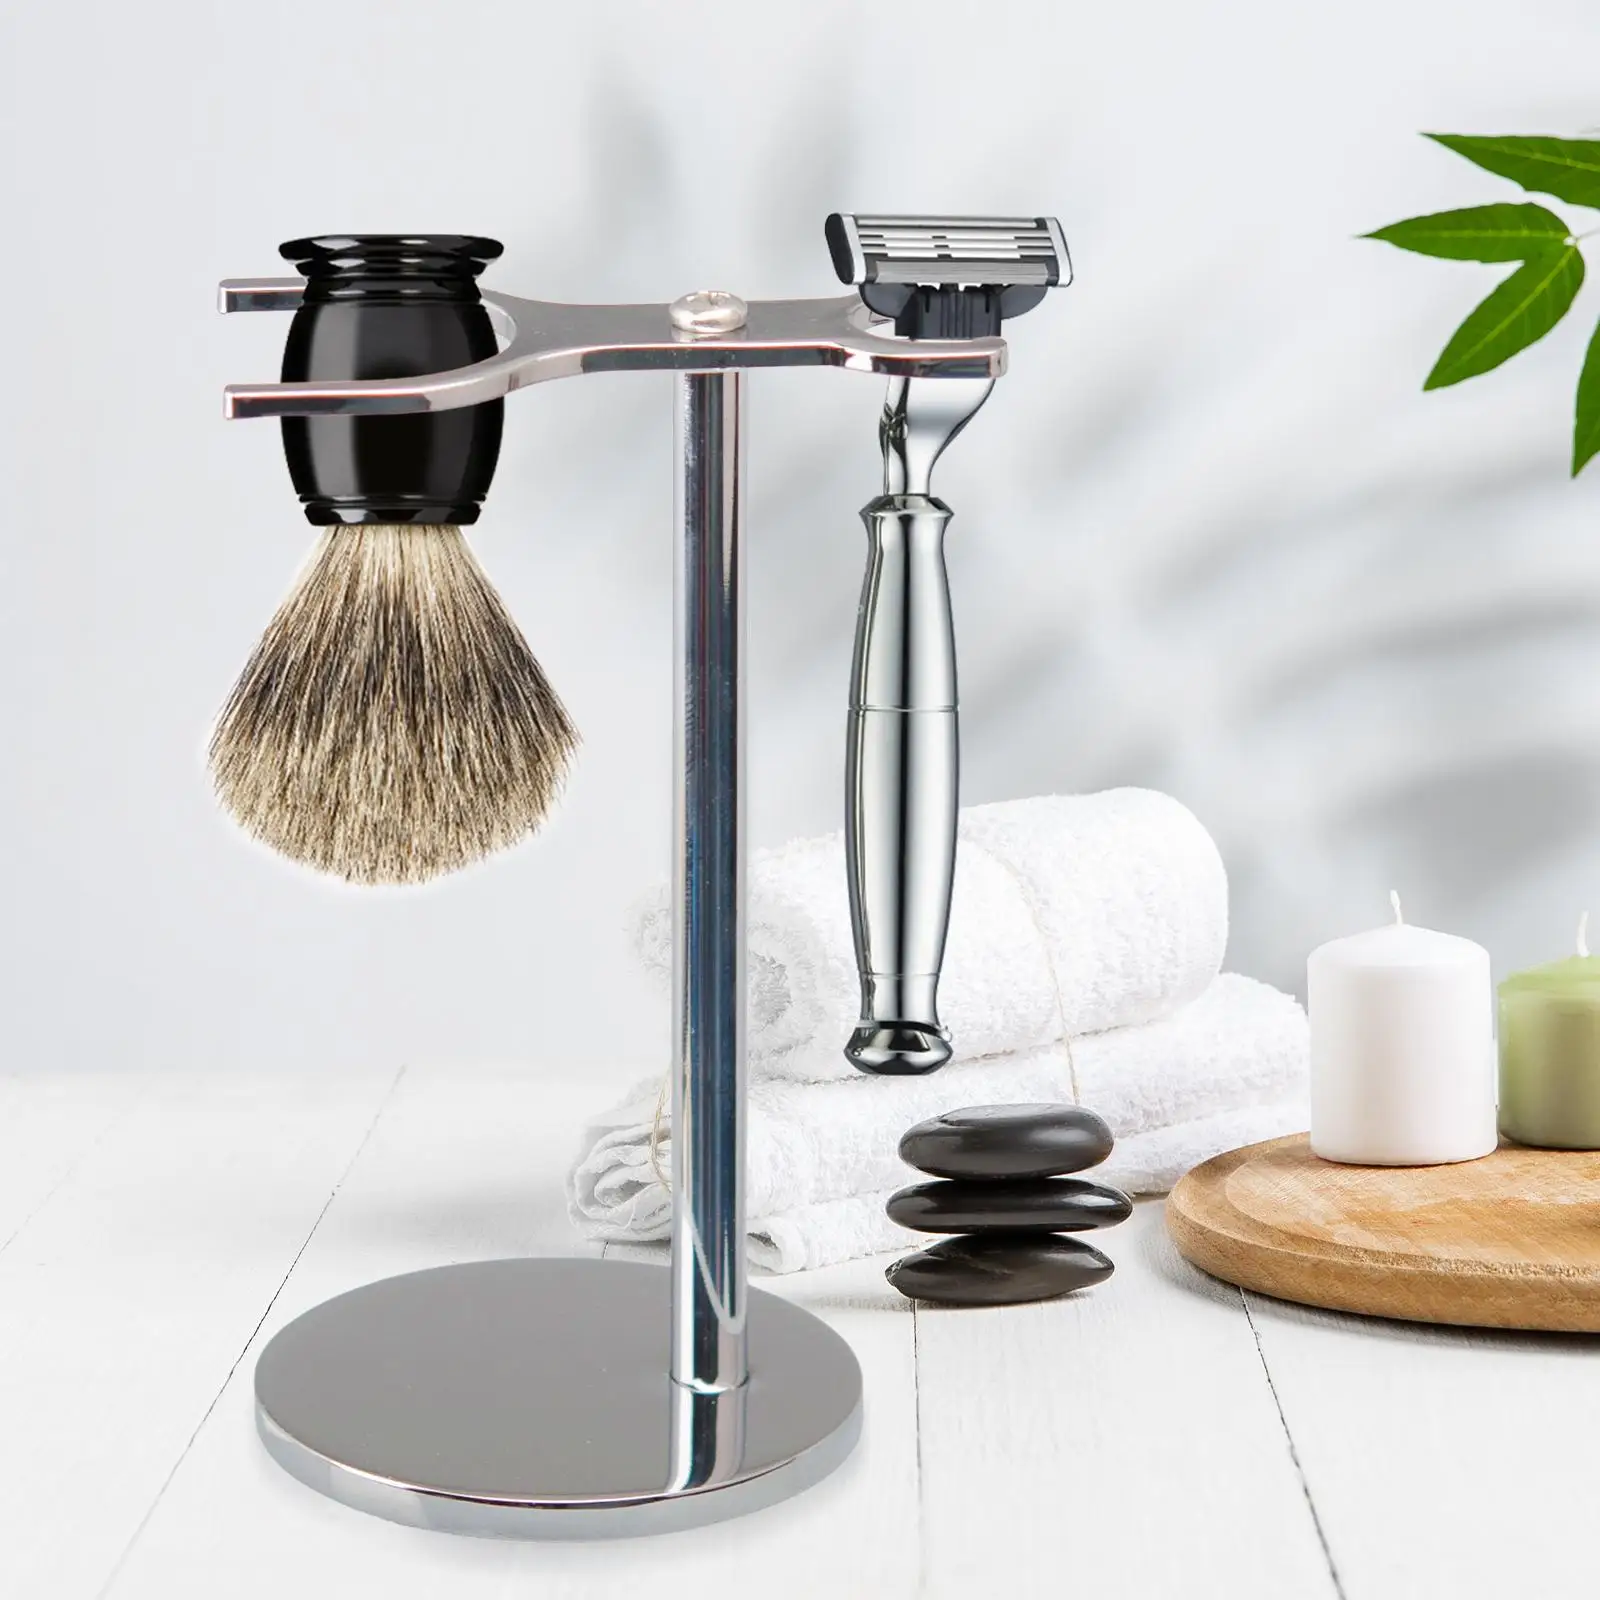 Shaving Brush Stand Holder Weighted Bottom Free Standing Shave Accessory Razor Holder and Shaving Brush Stand for Razor & Brush